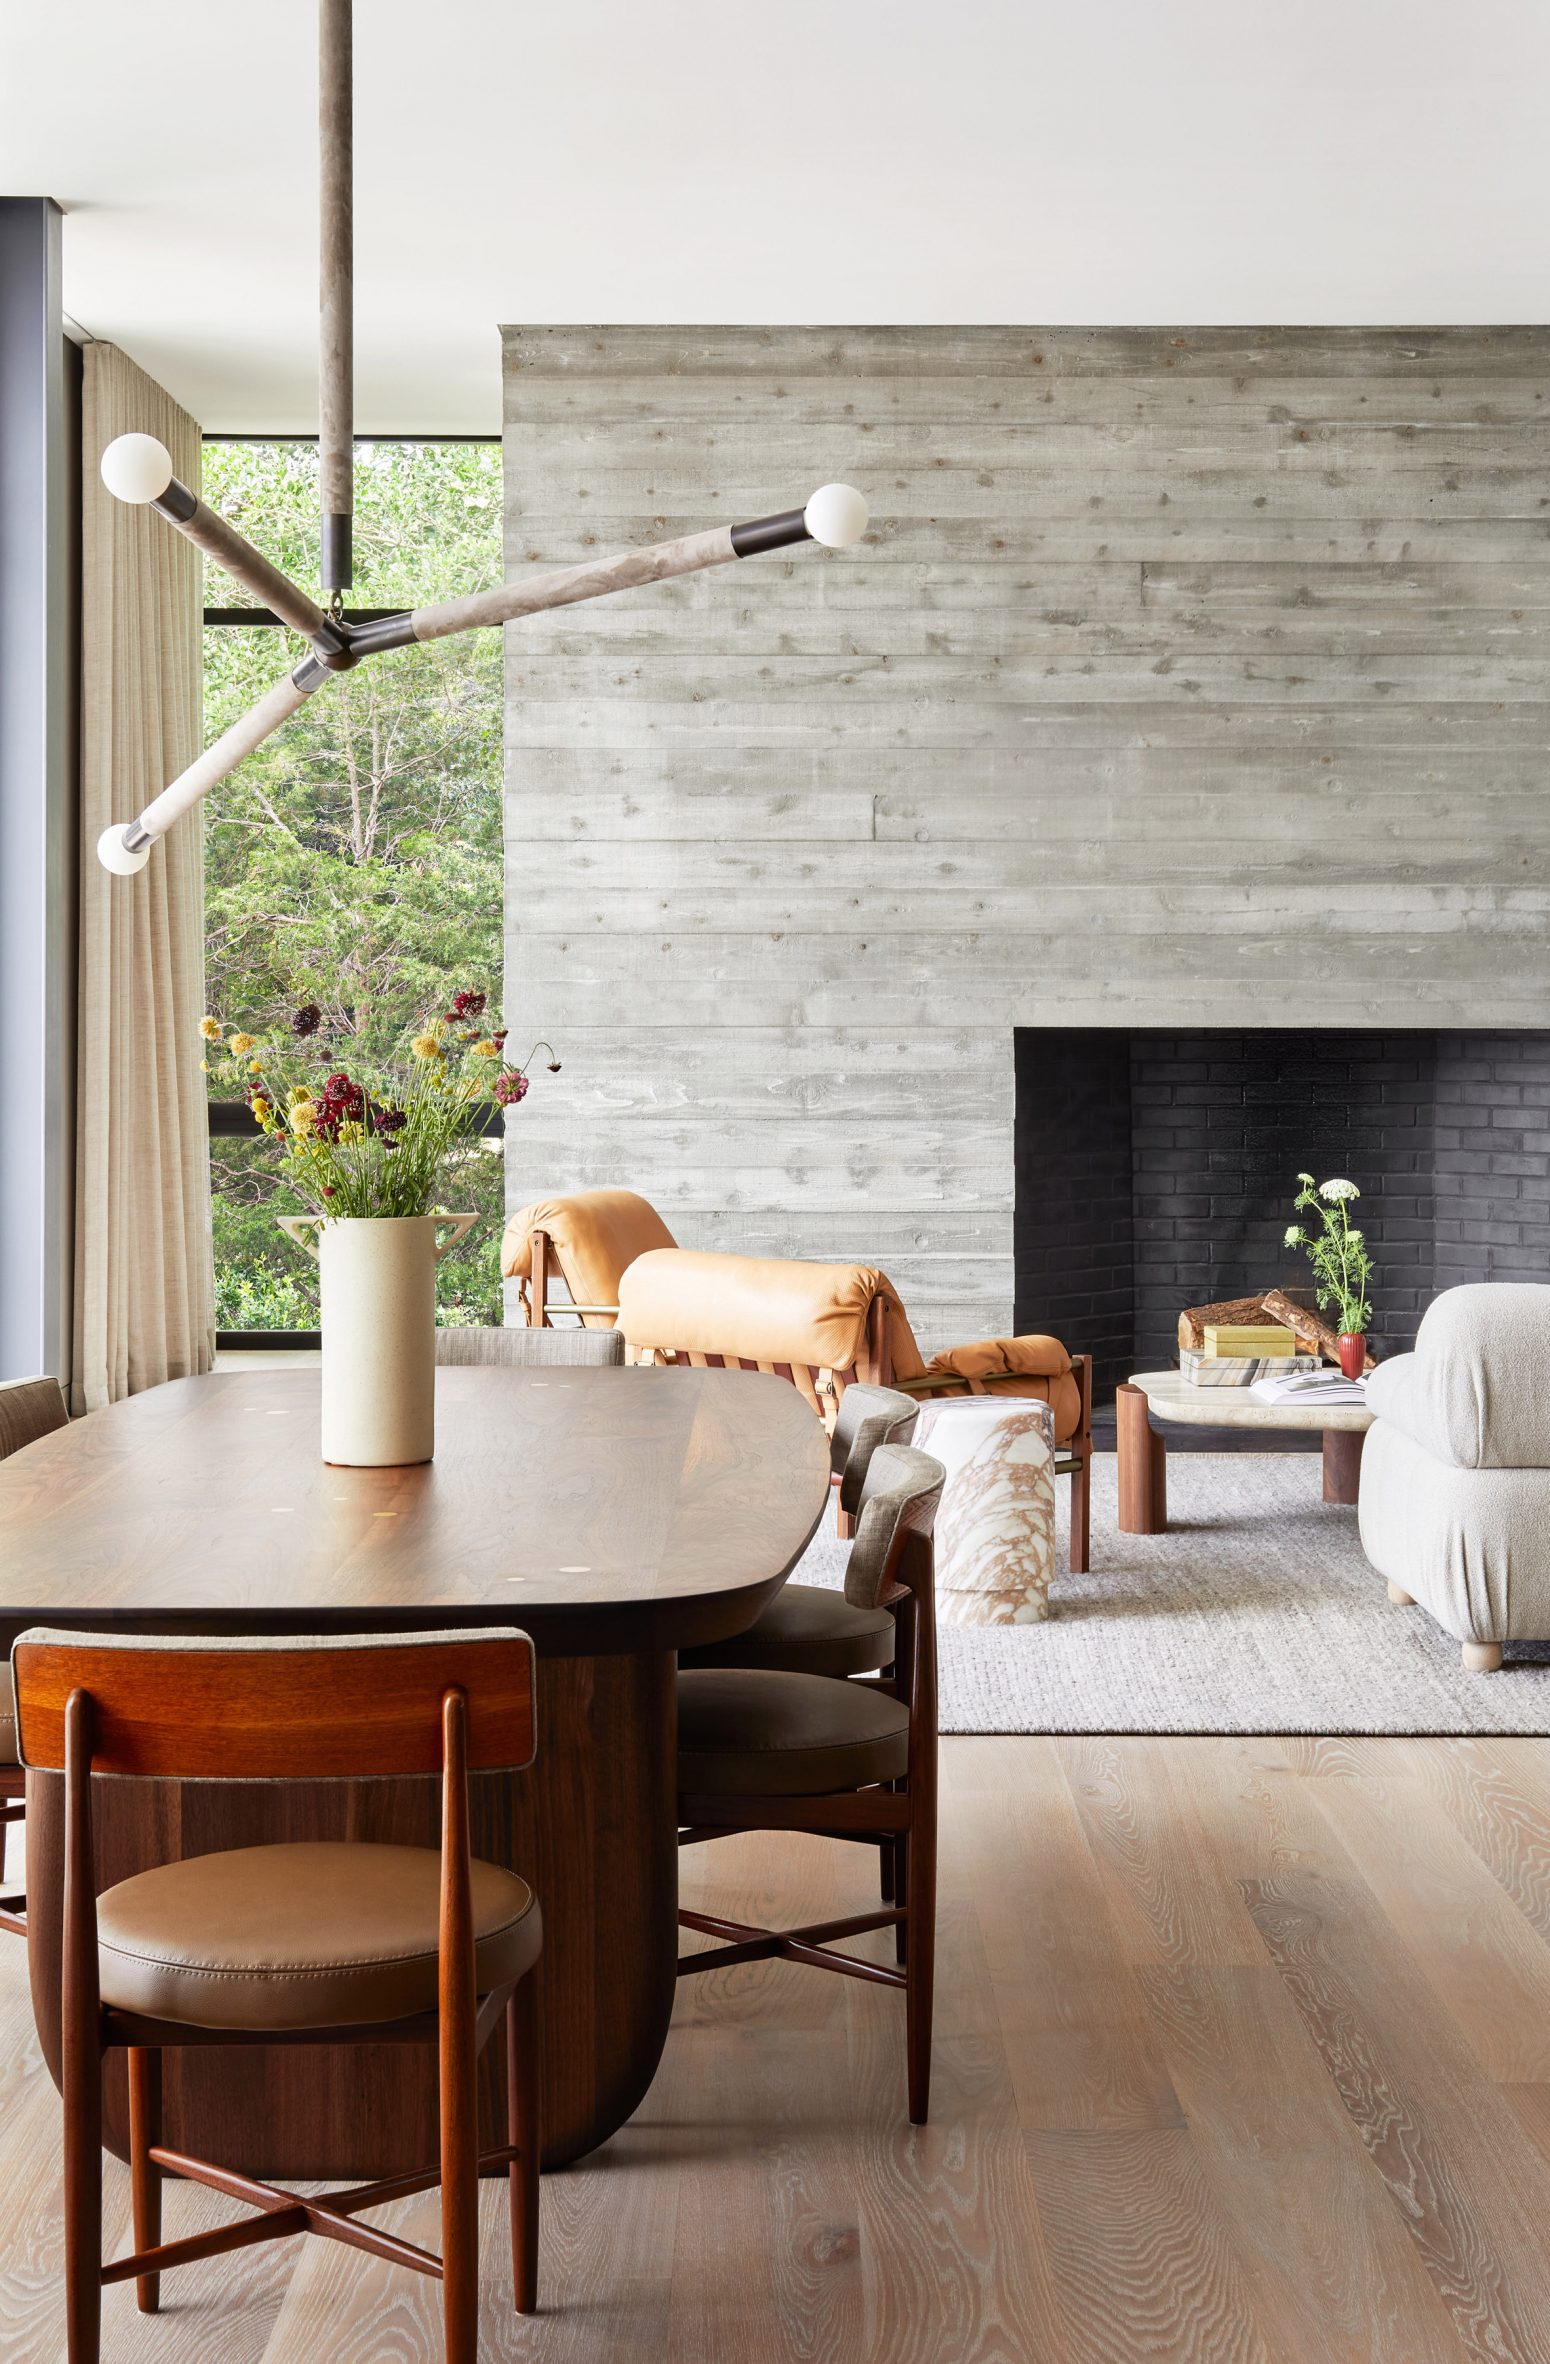 Board-marked concrete fireplace in the interior of a house in the Hamptons